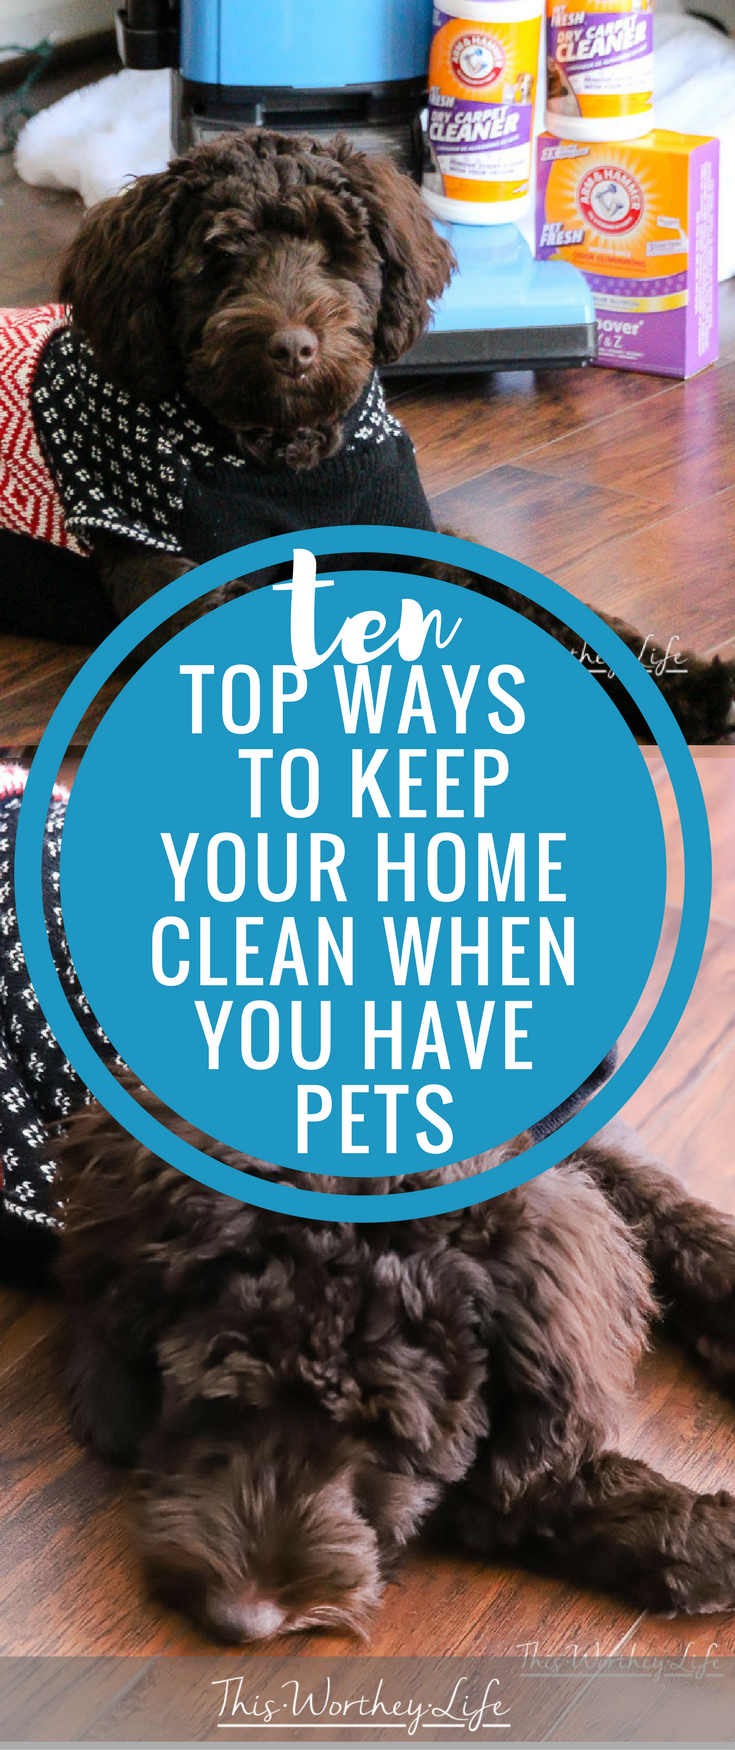 10 Top Ways To Keep Your Home Clean When You Have Pets. The holidays are here, and I'm sharing things I do to make sure my house is clean and ready to go. When you have pets, you may need to go the extra mile. Here's how I avoid doing a lot backbreaking cleaning before the holidays.